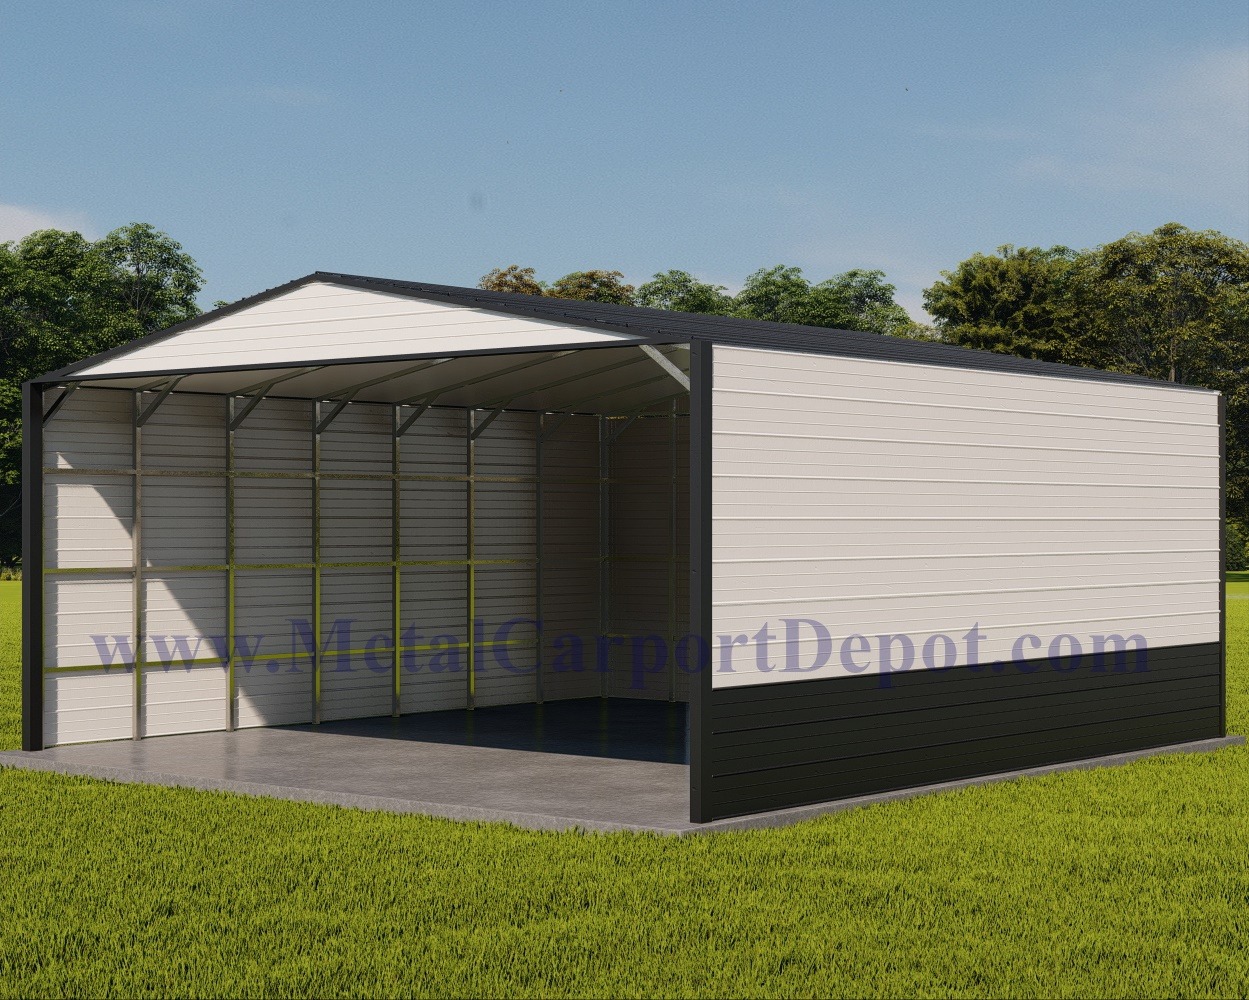 Wide Span Metal Structure Image With Black Roof, Black Trim, White Walls, and lower 3' wainscot